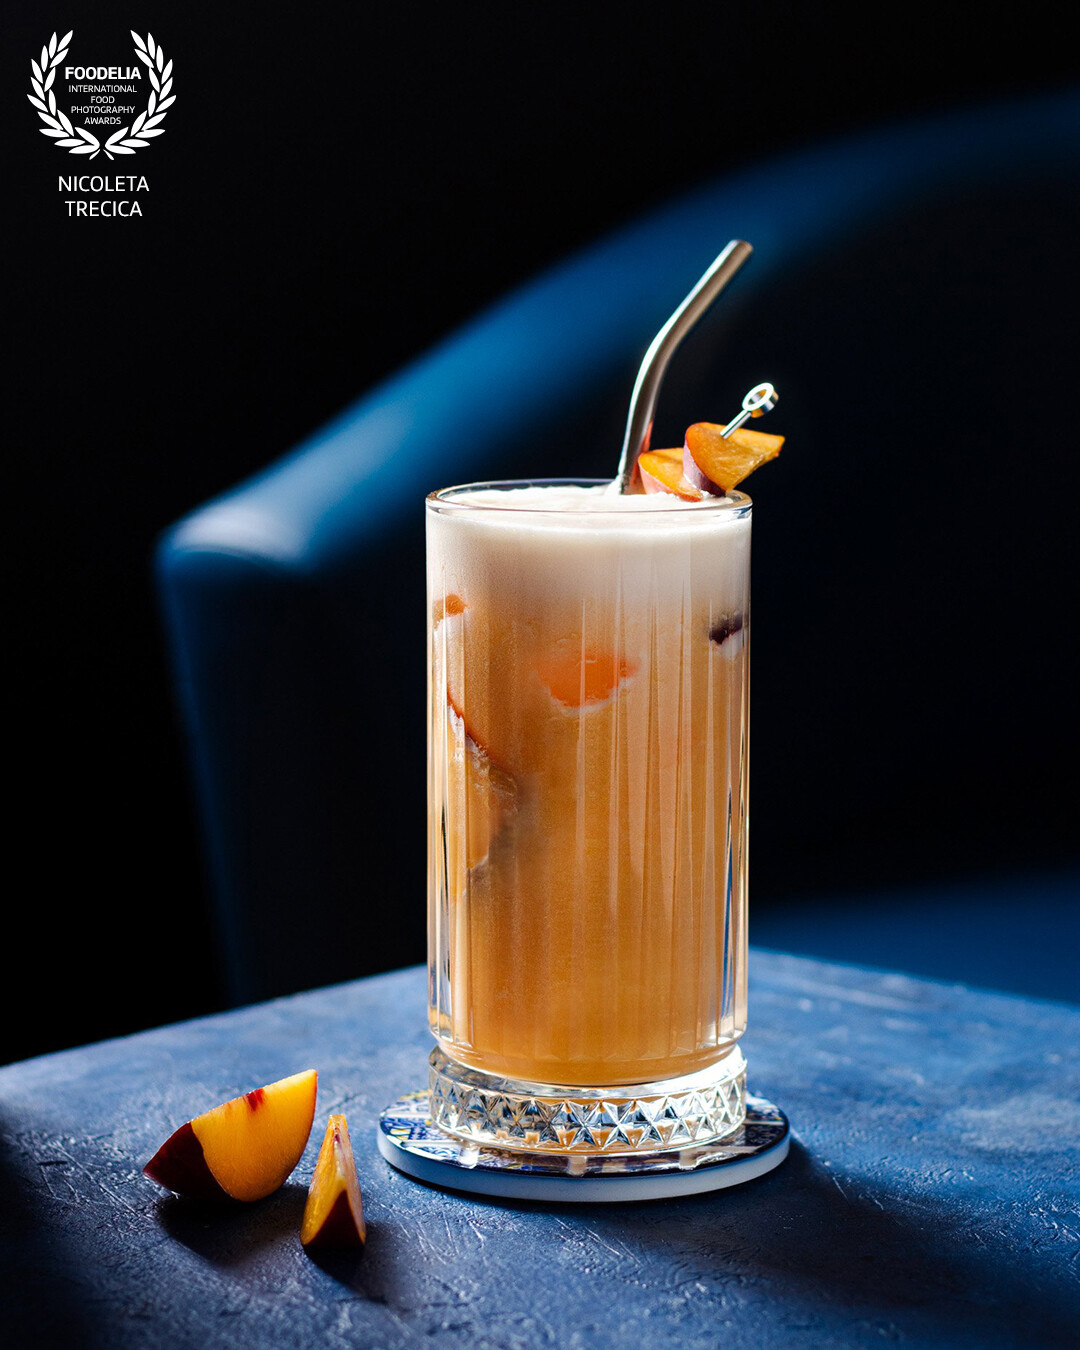 The idea of this image was to create a cosy atmosphere in a pub. The colours of the surrounding set the perfect backdrop and contrast for enjoying this delightful, fruity cocktail.